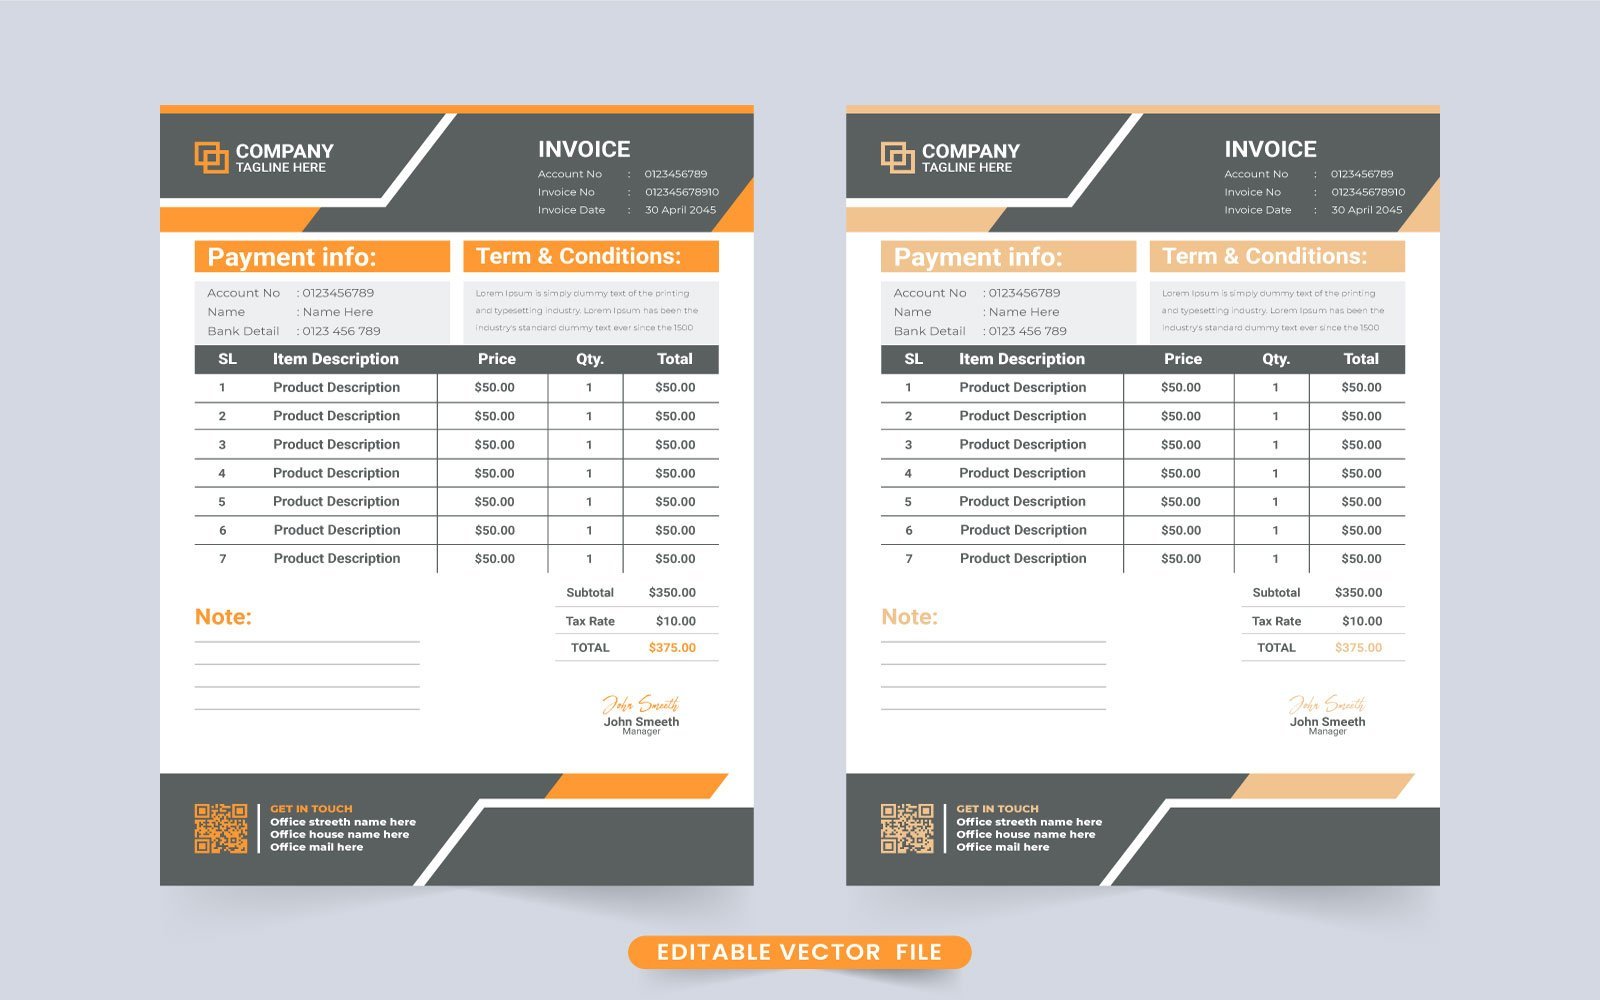 Template #277185 Invoice Template Webdesign Template - Logo template Preview